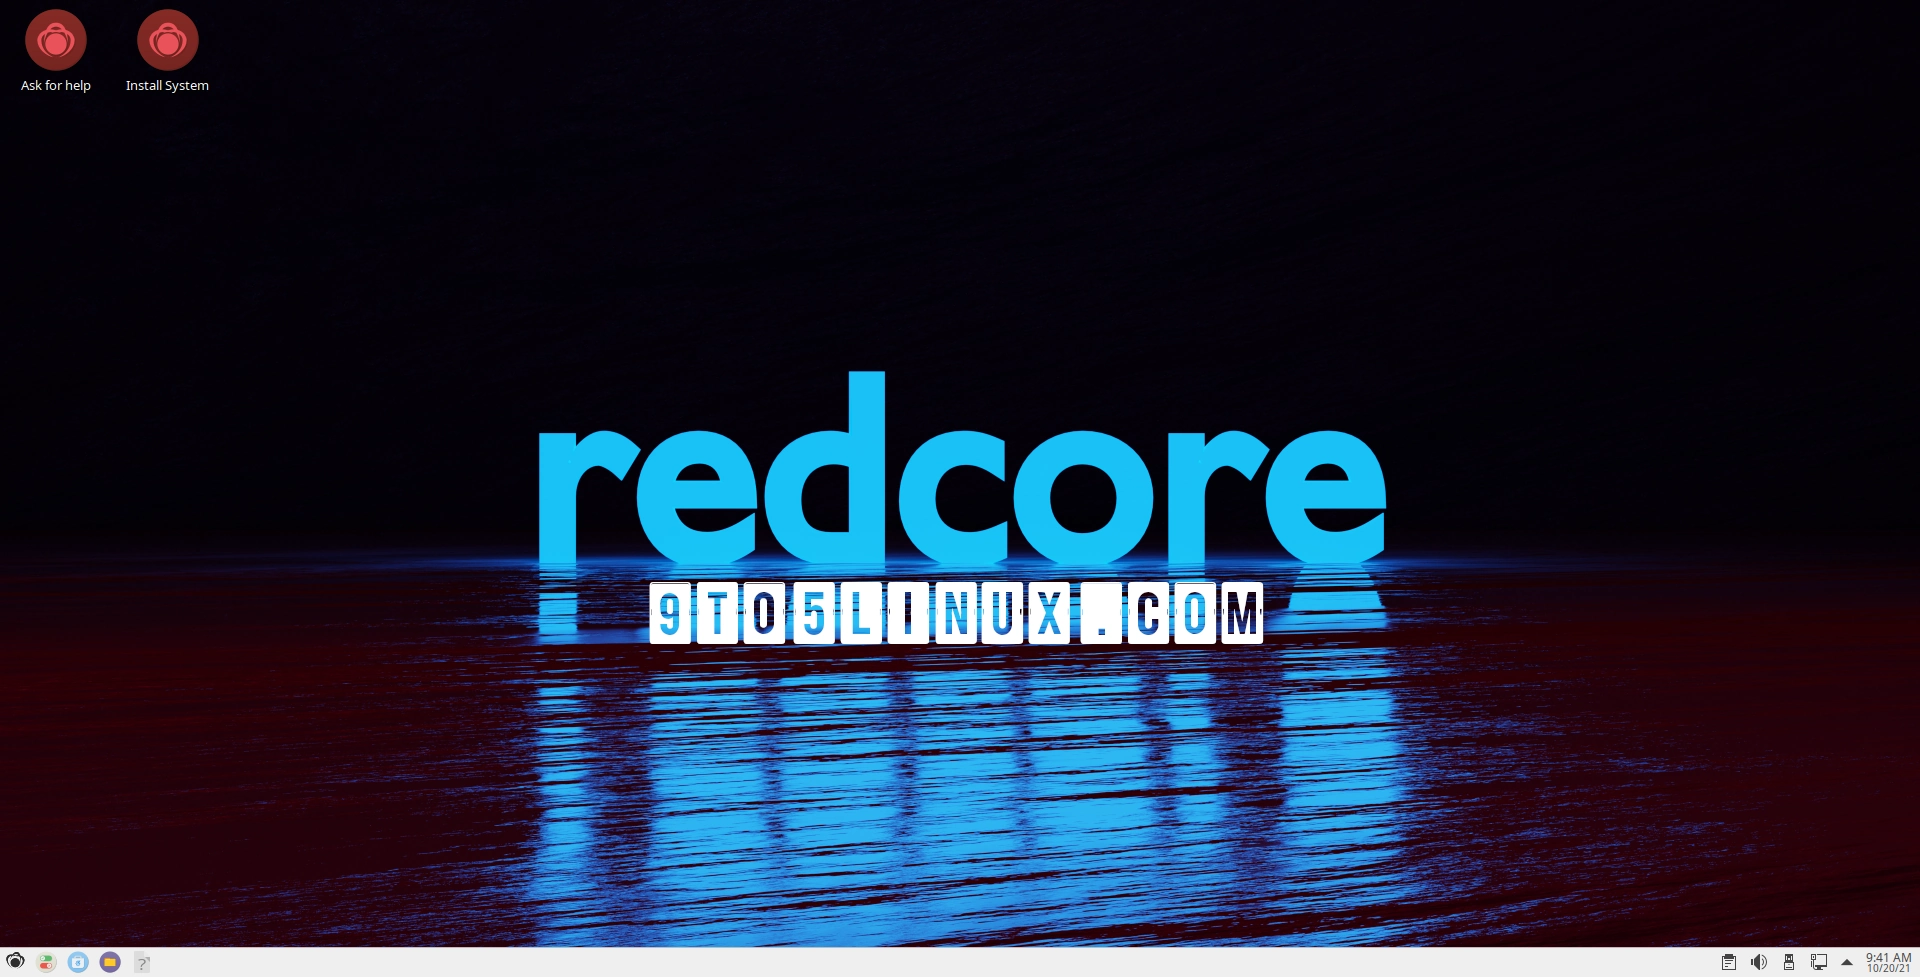 Redcore Linux Still Aims to Bring Gentoo Linux to the Masses, Now Ships with Linux 5.14